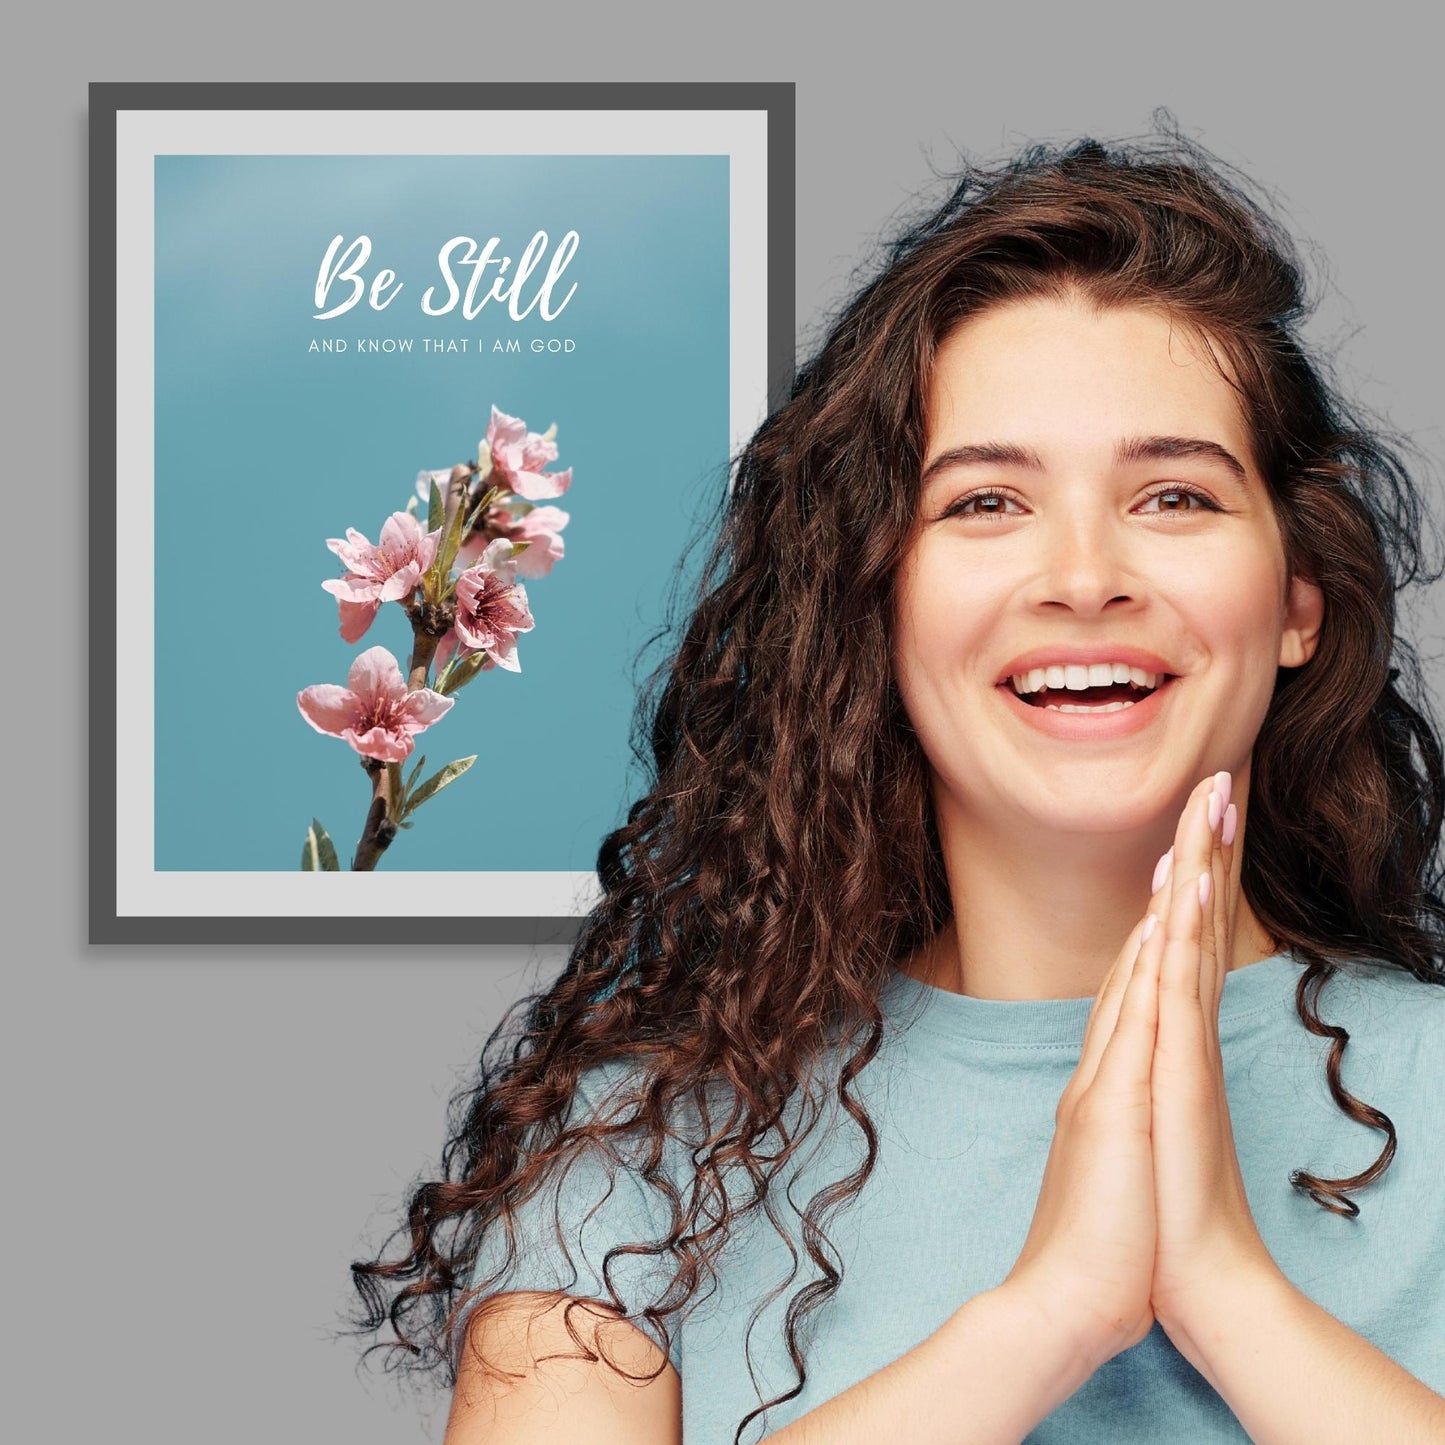 Inspirational Word Art - Be Still and know that I am God - Flower Design Wall Decor (8X10 print) choose from 2 text colors | shown with white text in grey frame on grey interior wall | oak7west.com